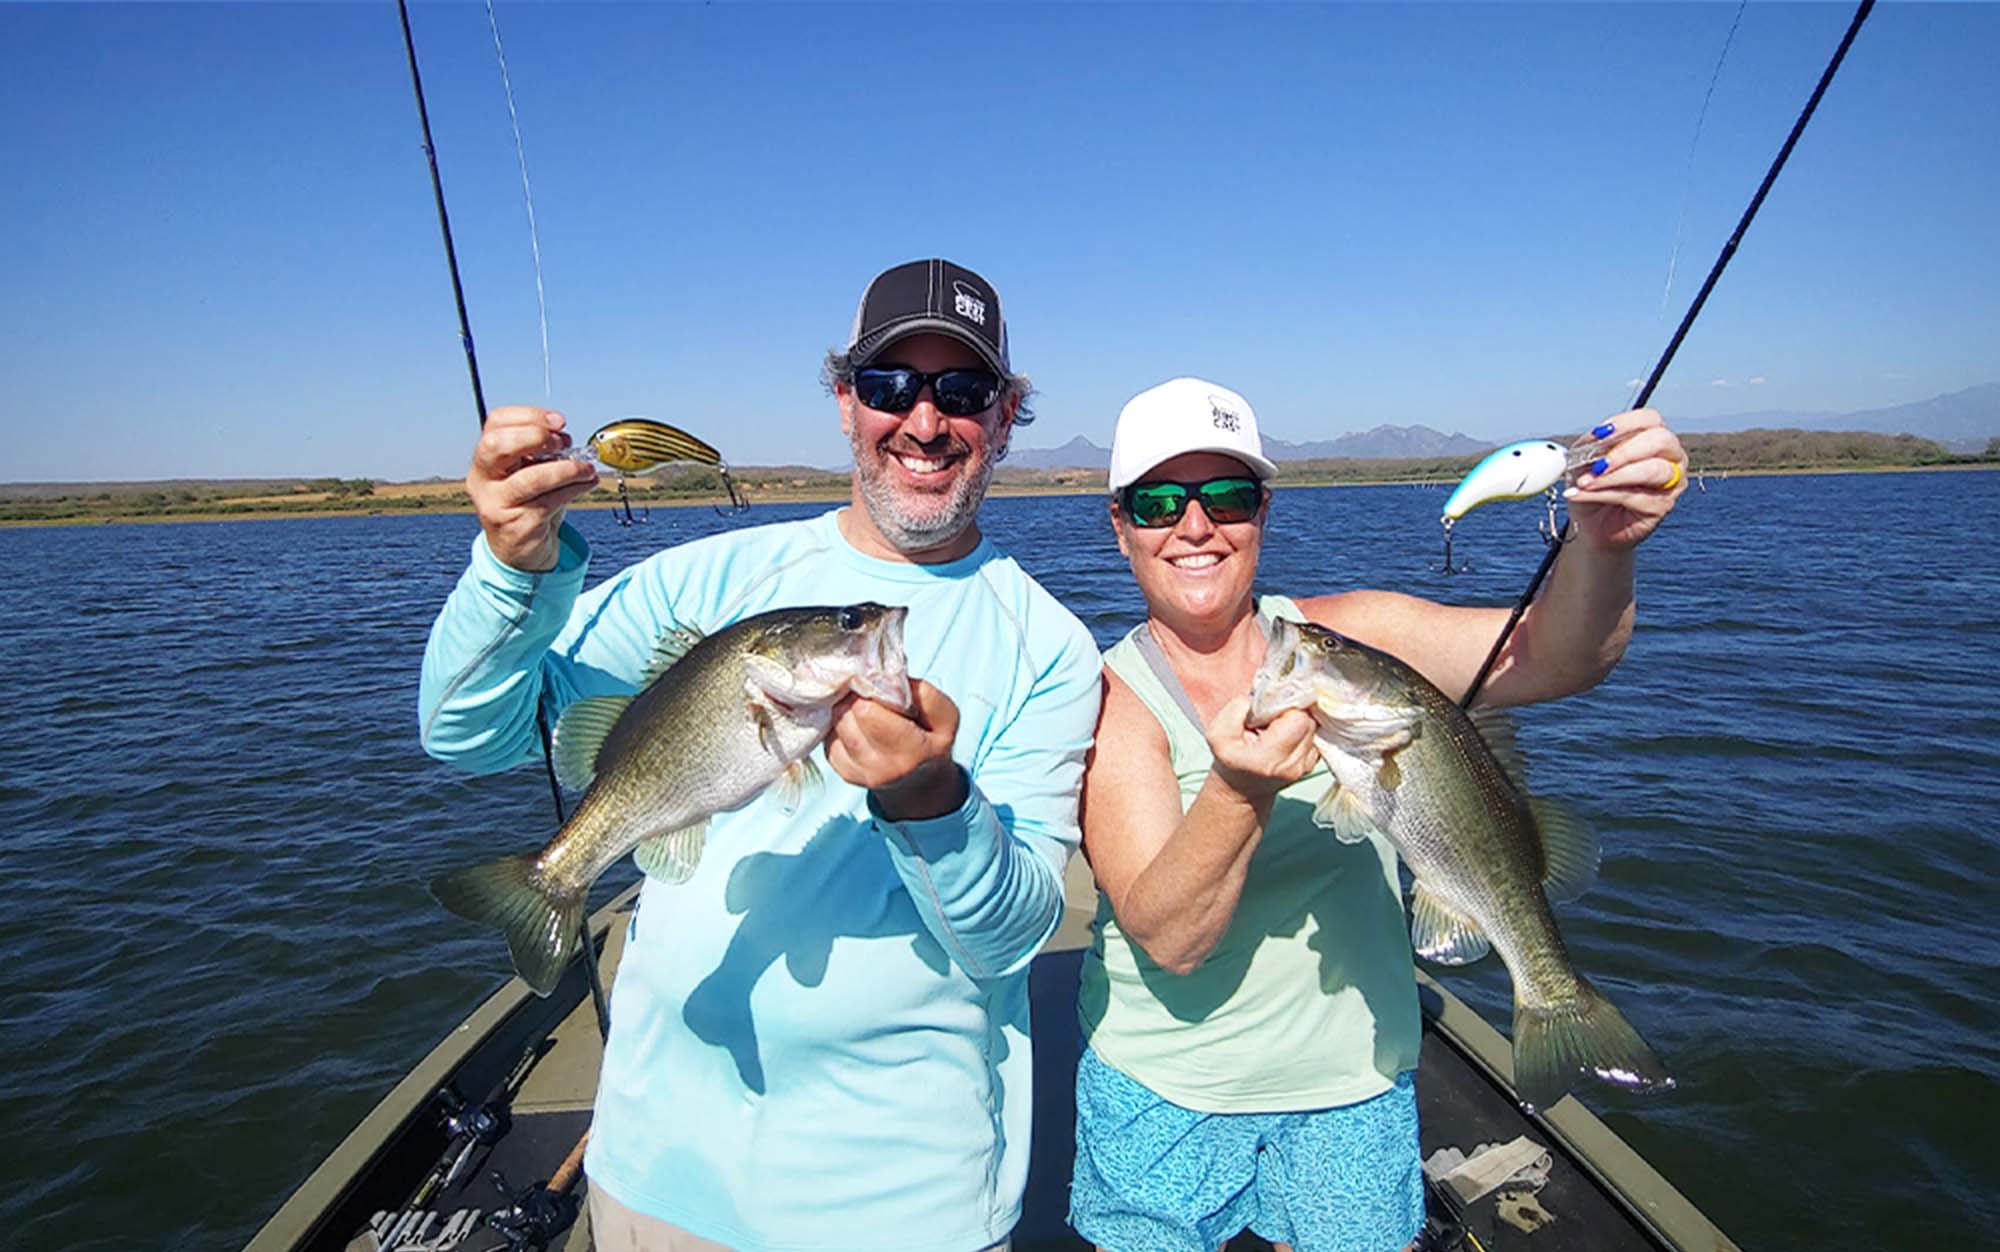 A man and a woman on a boat holding fishing rods and bass